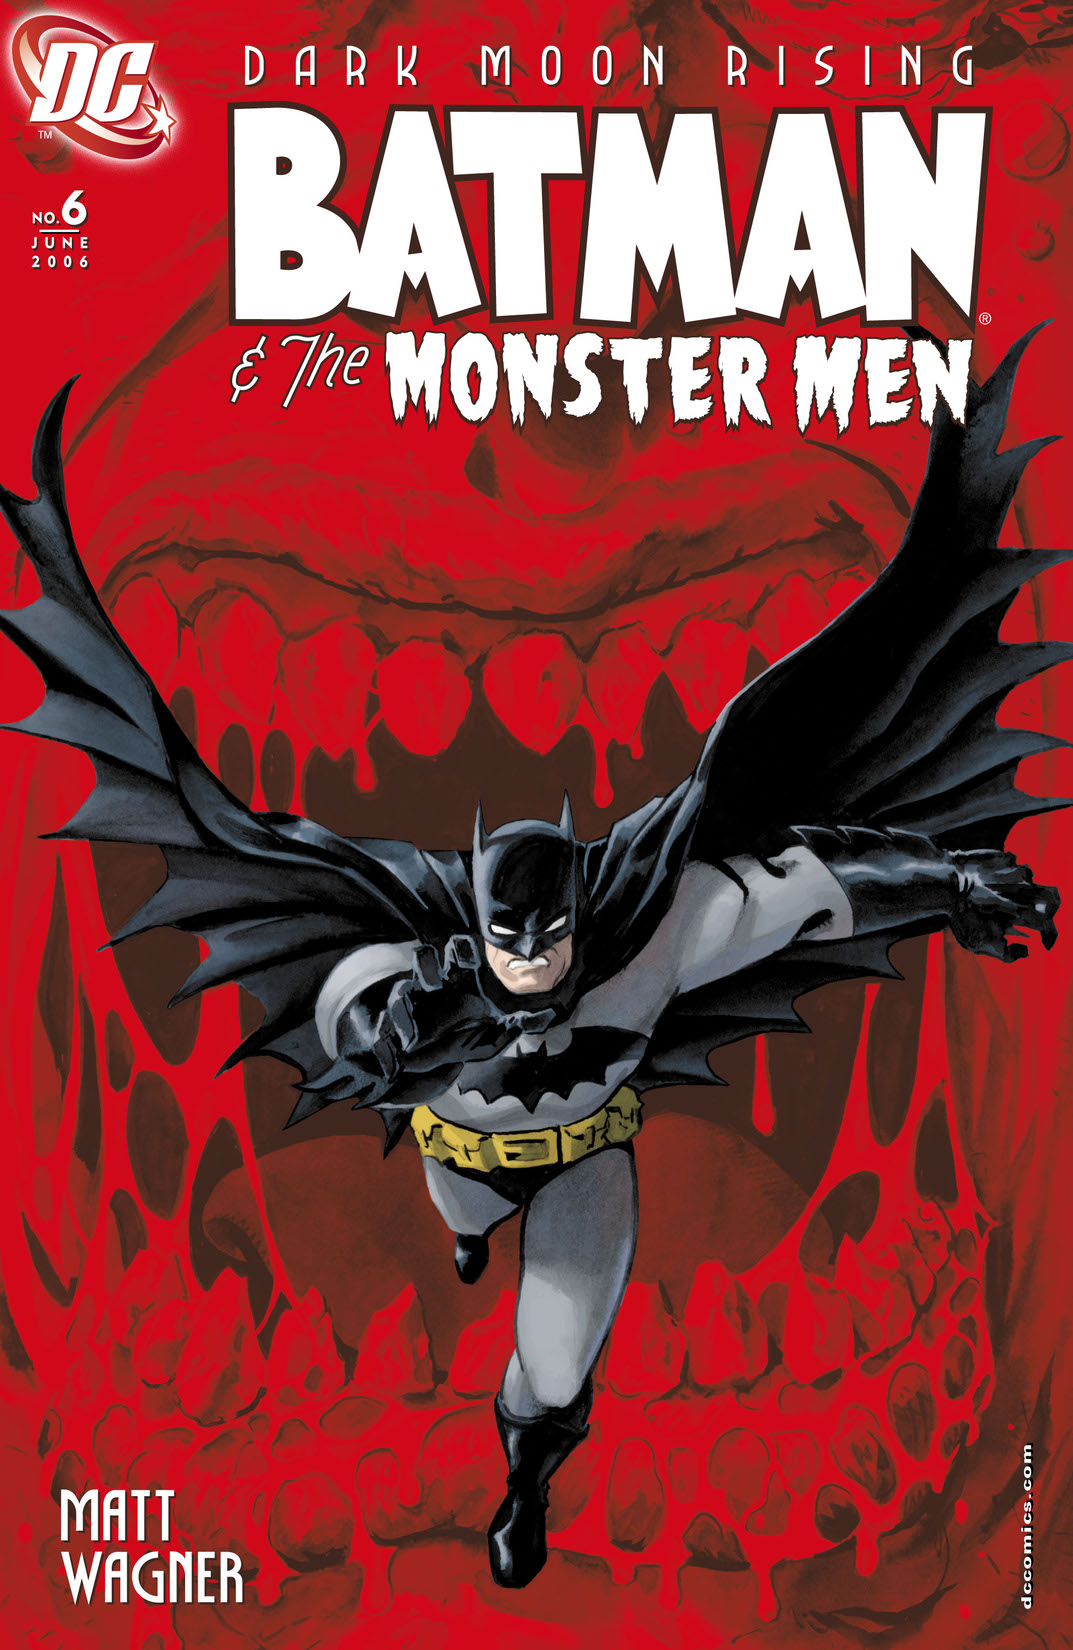 Batman and the Monster Men #6 preview images